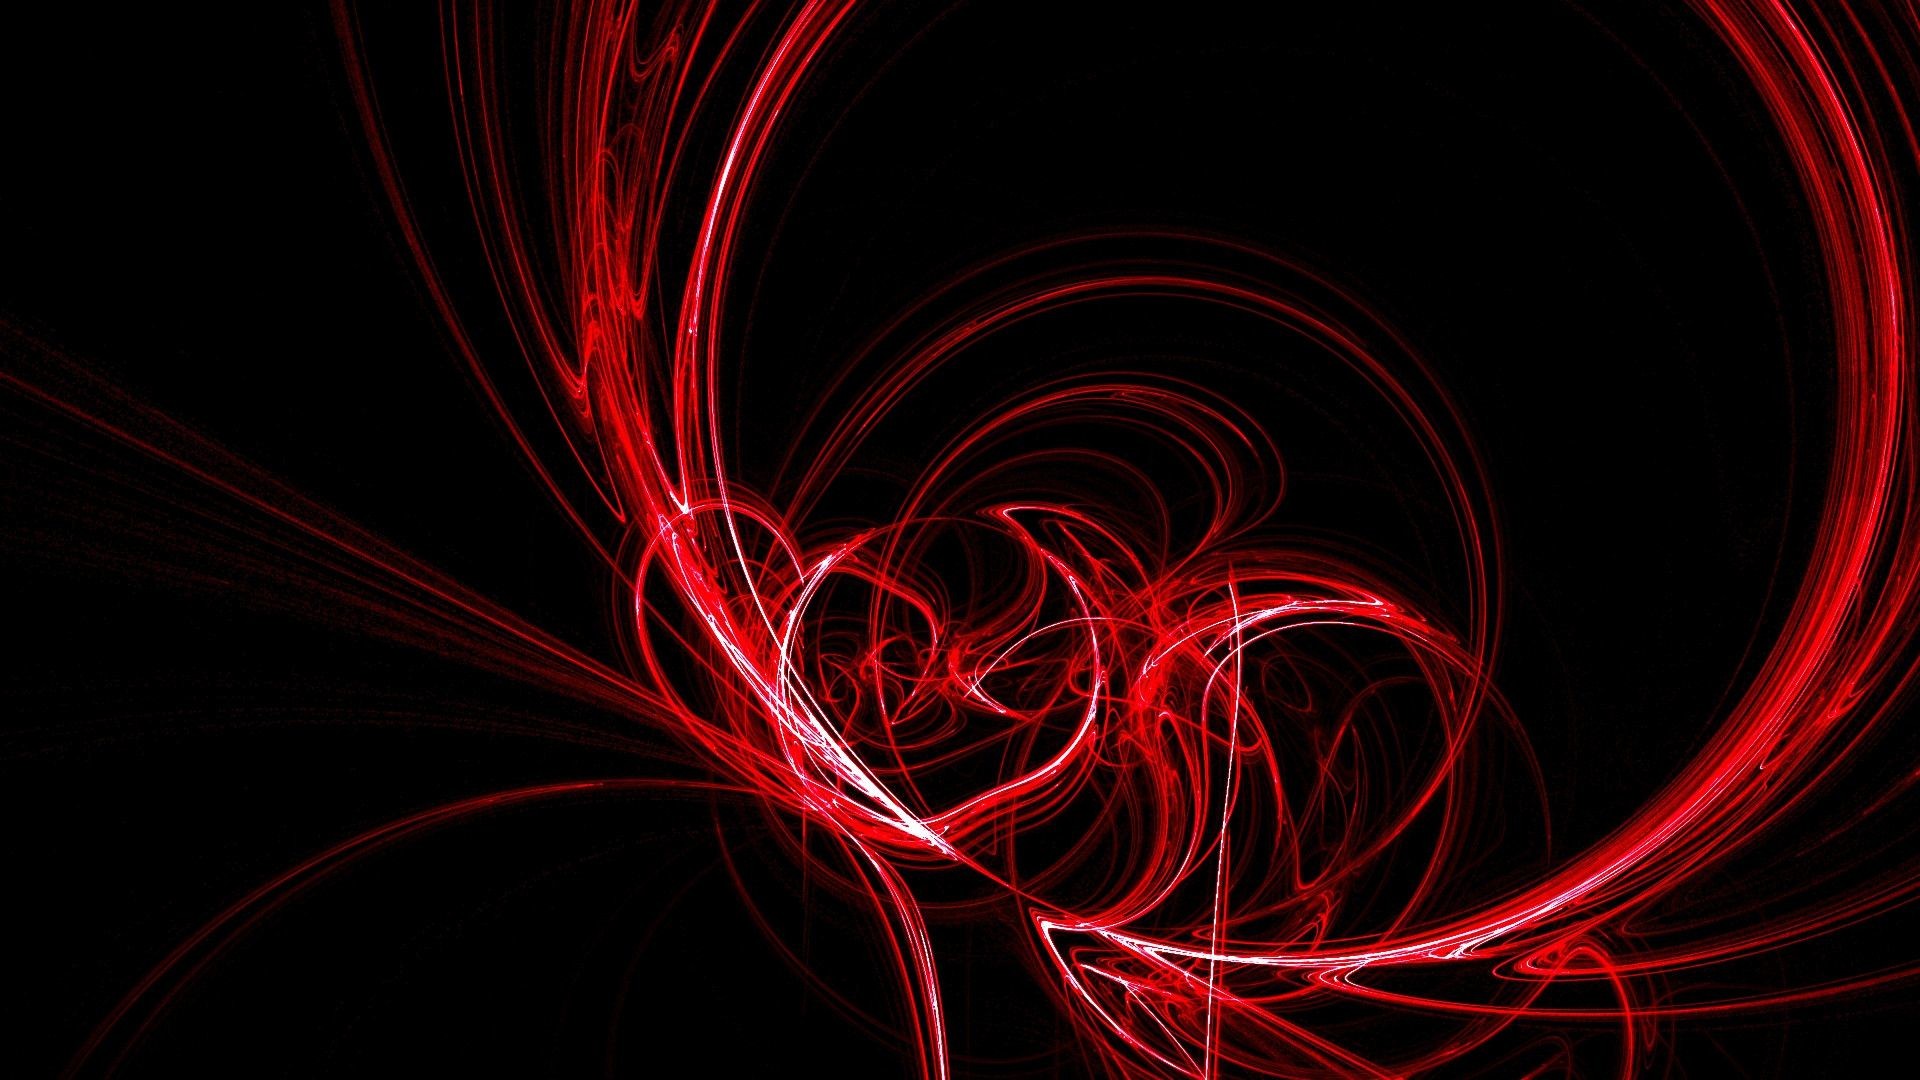 1920x1080 Download Red Abstract Wallpaper 1920 x 1080